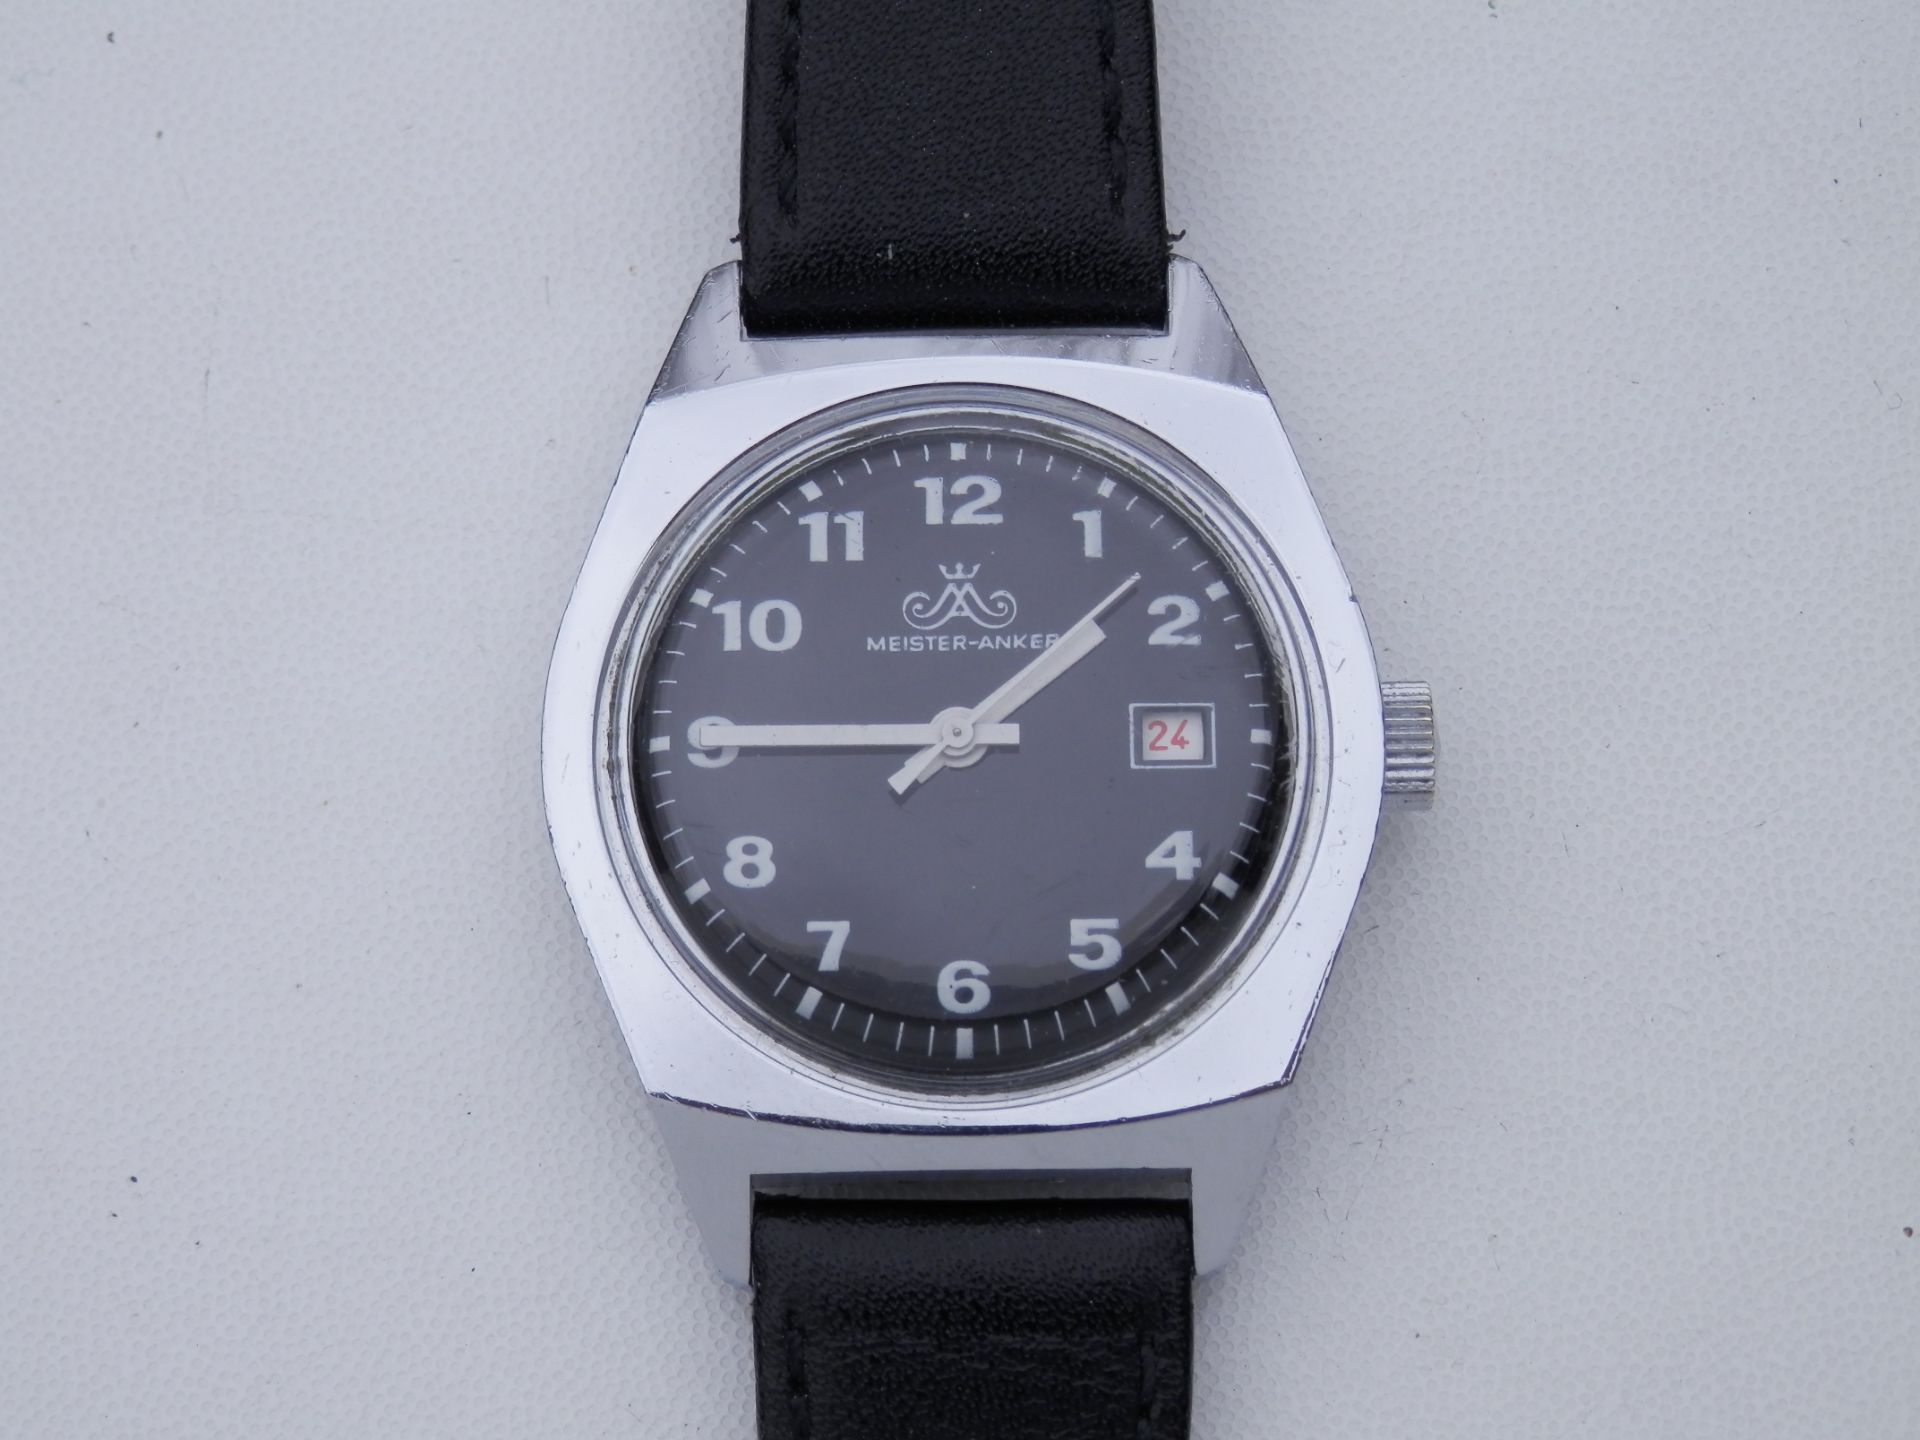 SUPERB RARE GENTS 1960S GERMAN MADE MEISTER ANKER HAND WIND DATE WATCH. - Image 4 of 10